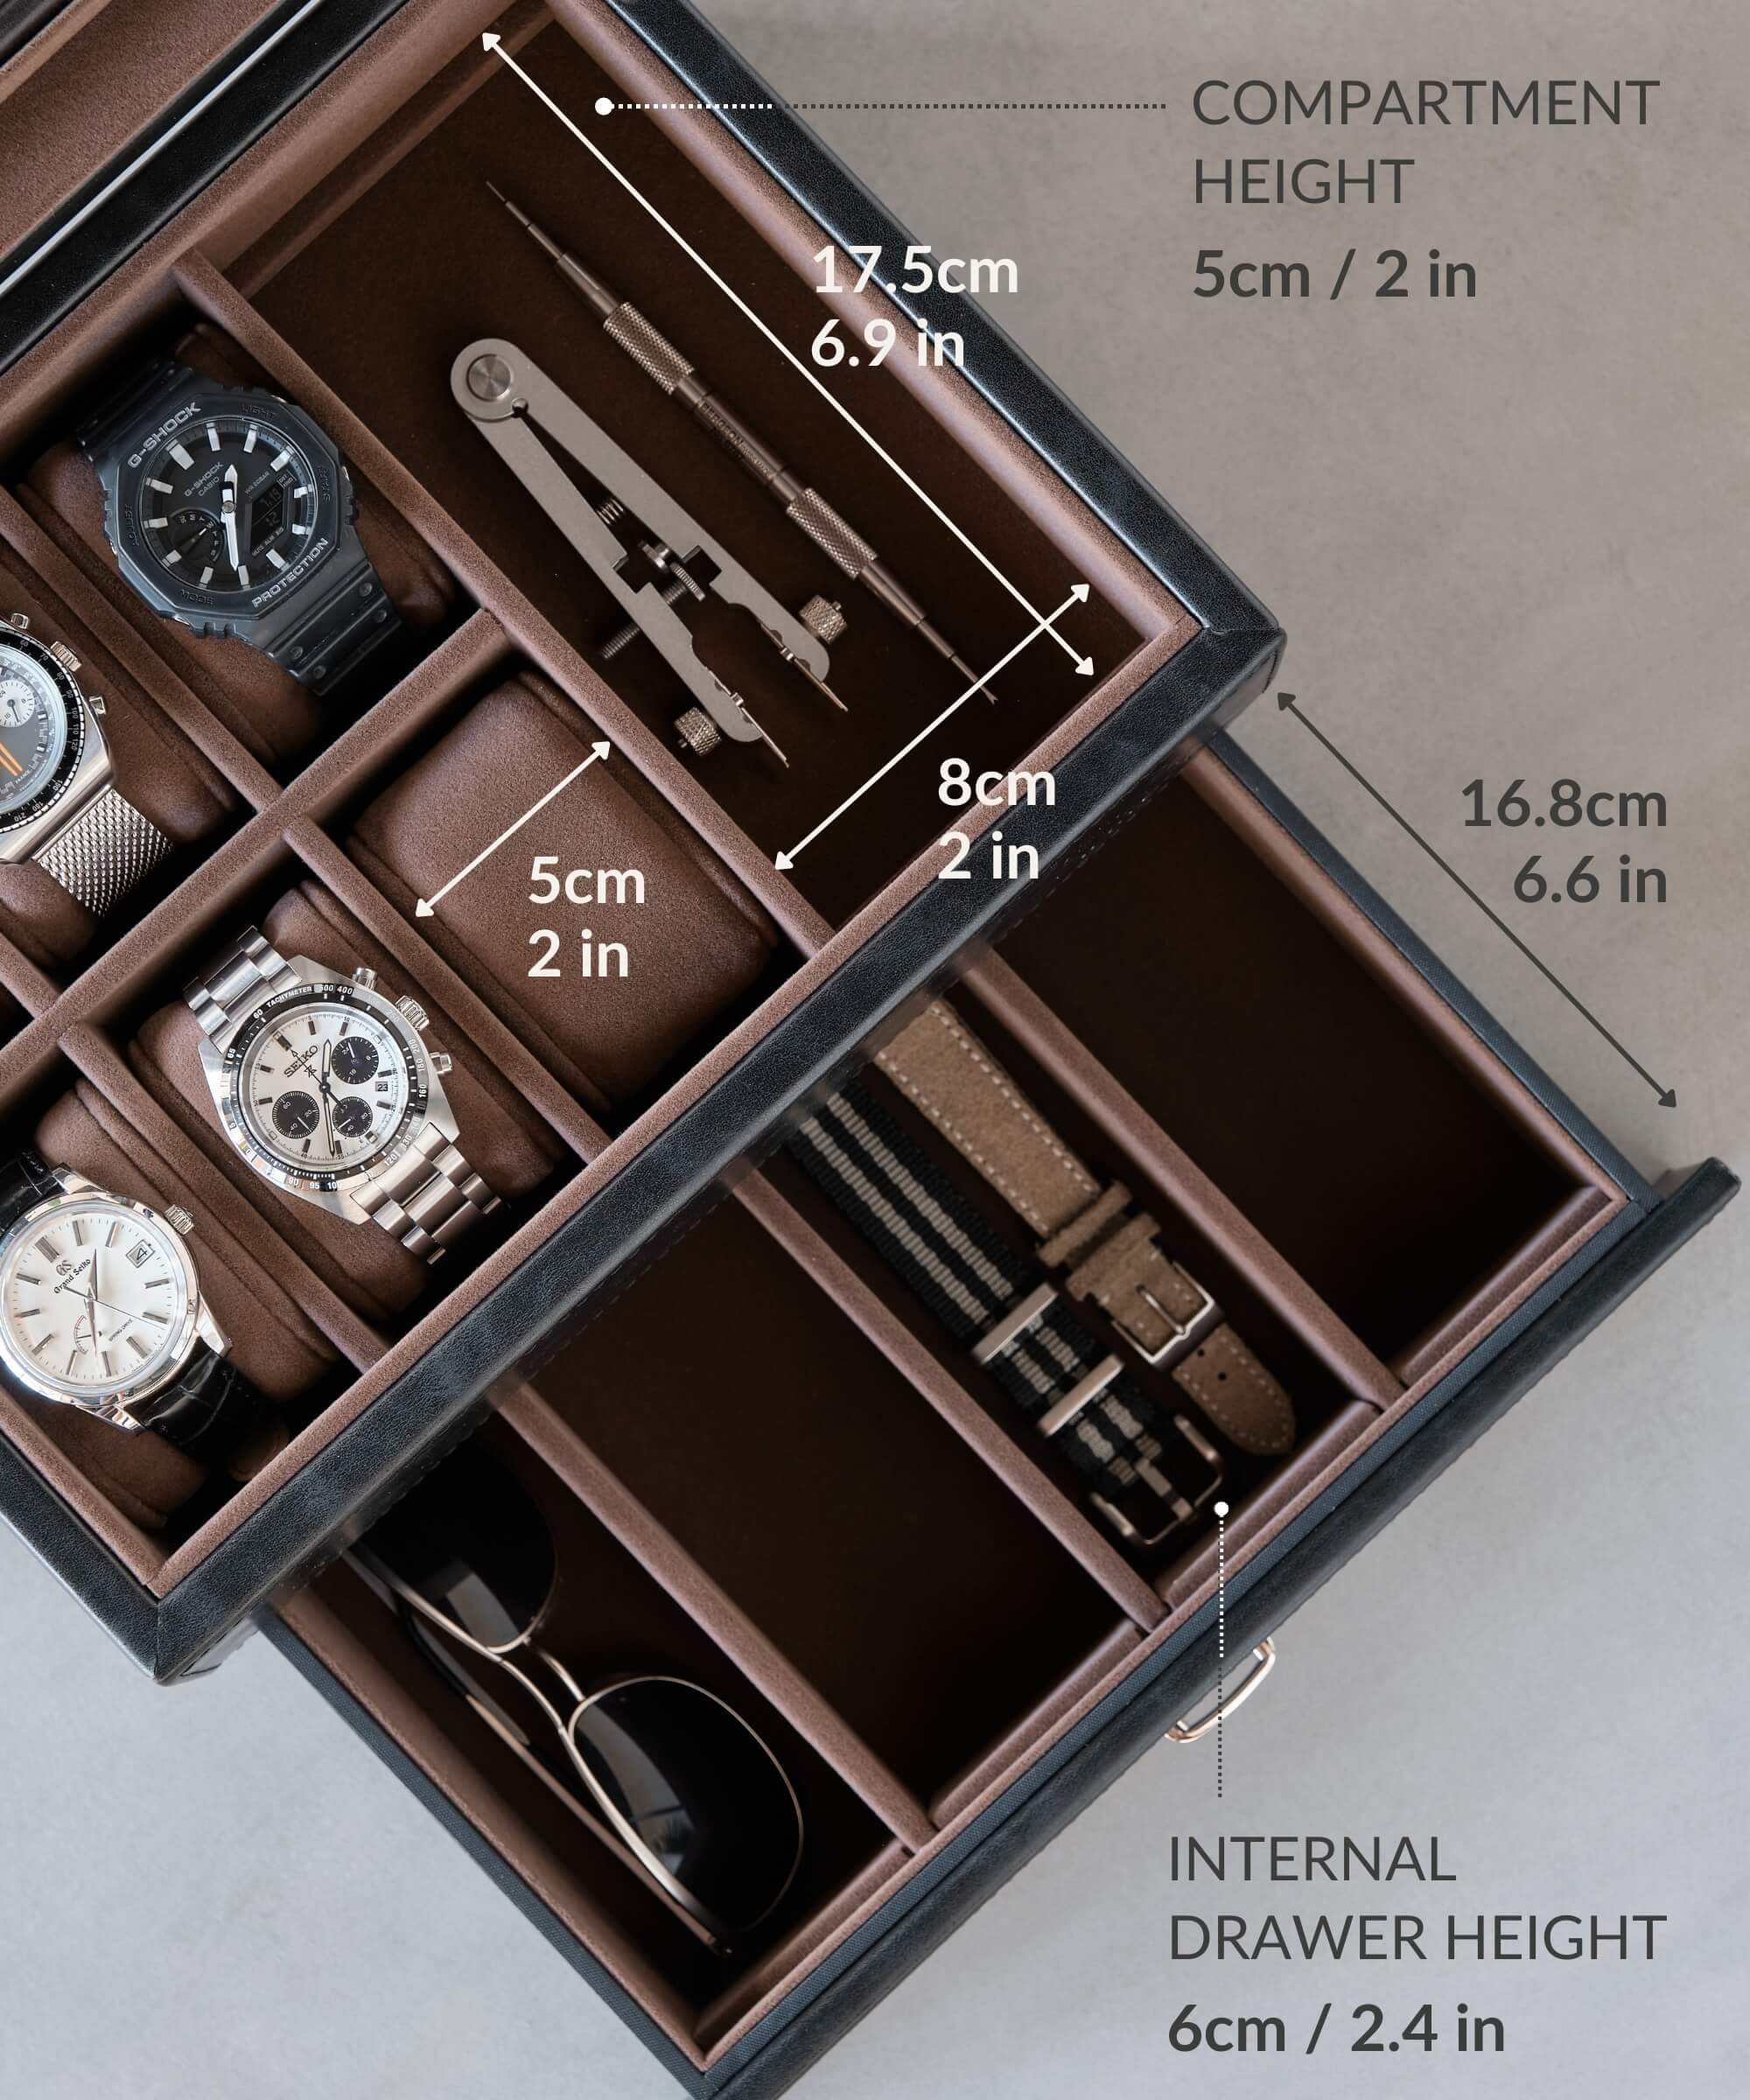 The TAWBURY Bayswater 6 Watch Jewellery Box - Black is perfect for those looking to protect and organise their collection of watches. Made of sleek black leather, this watch box can hold a number of.